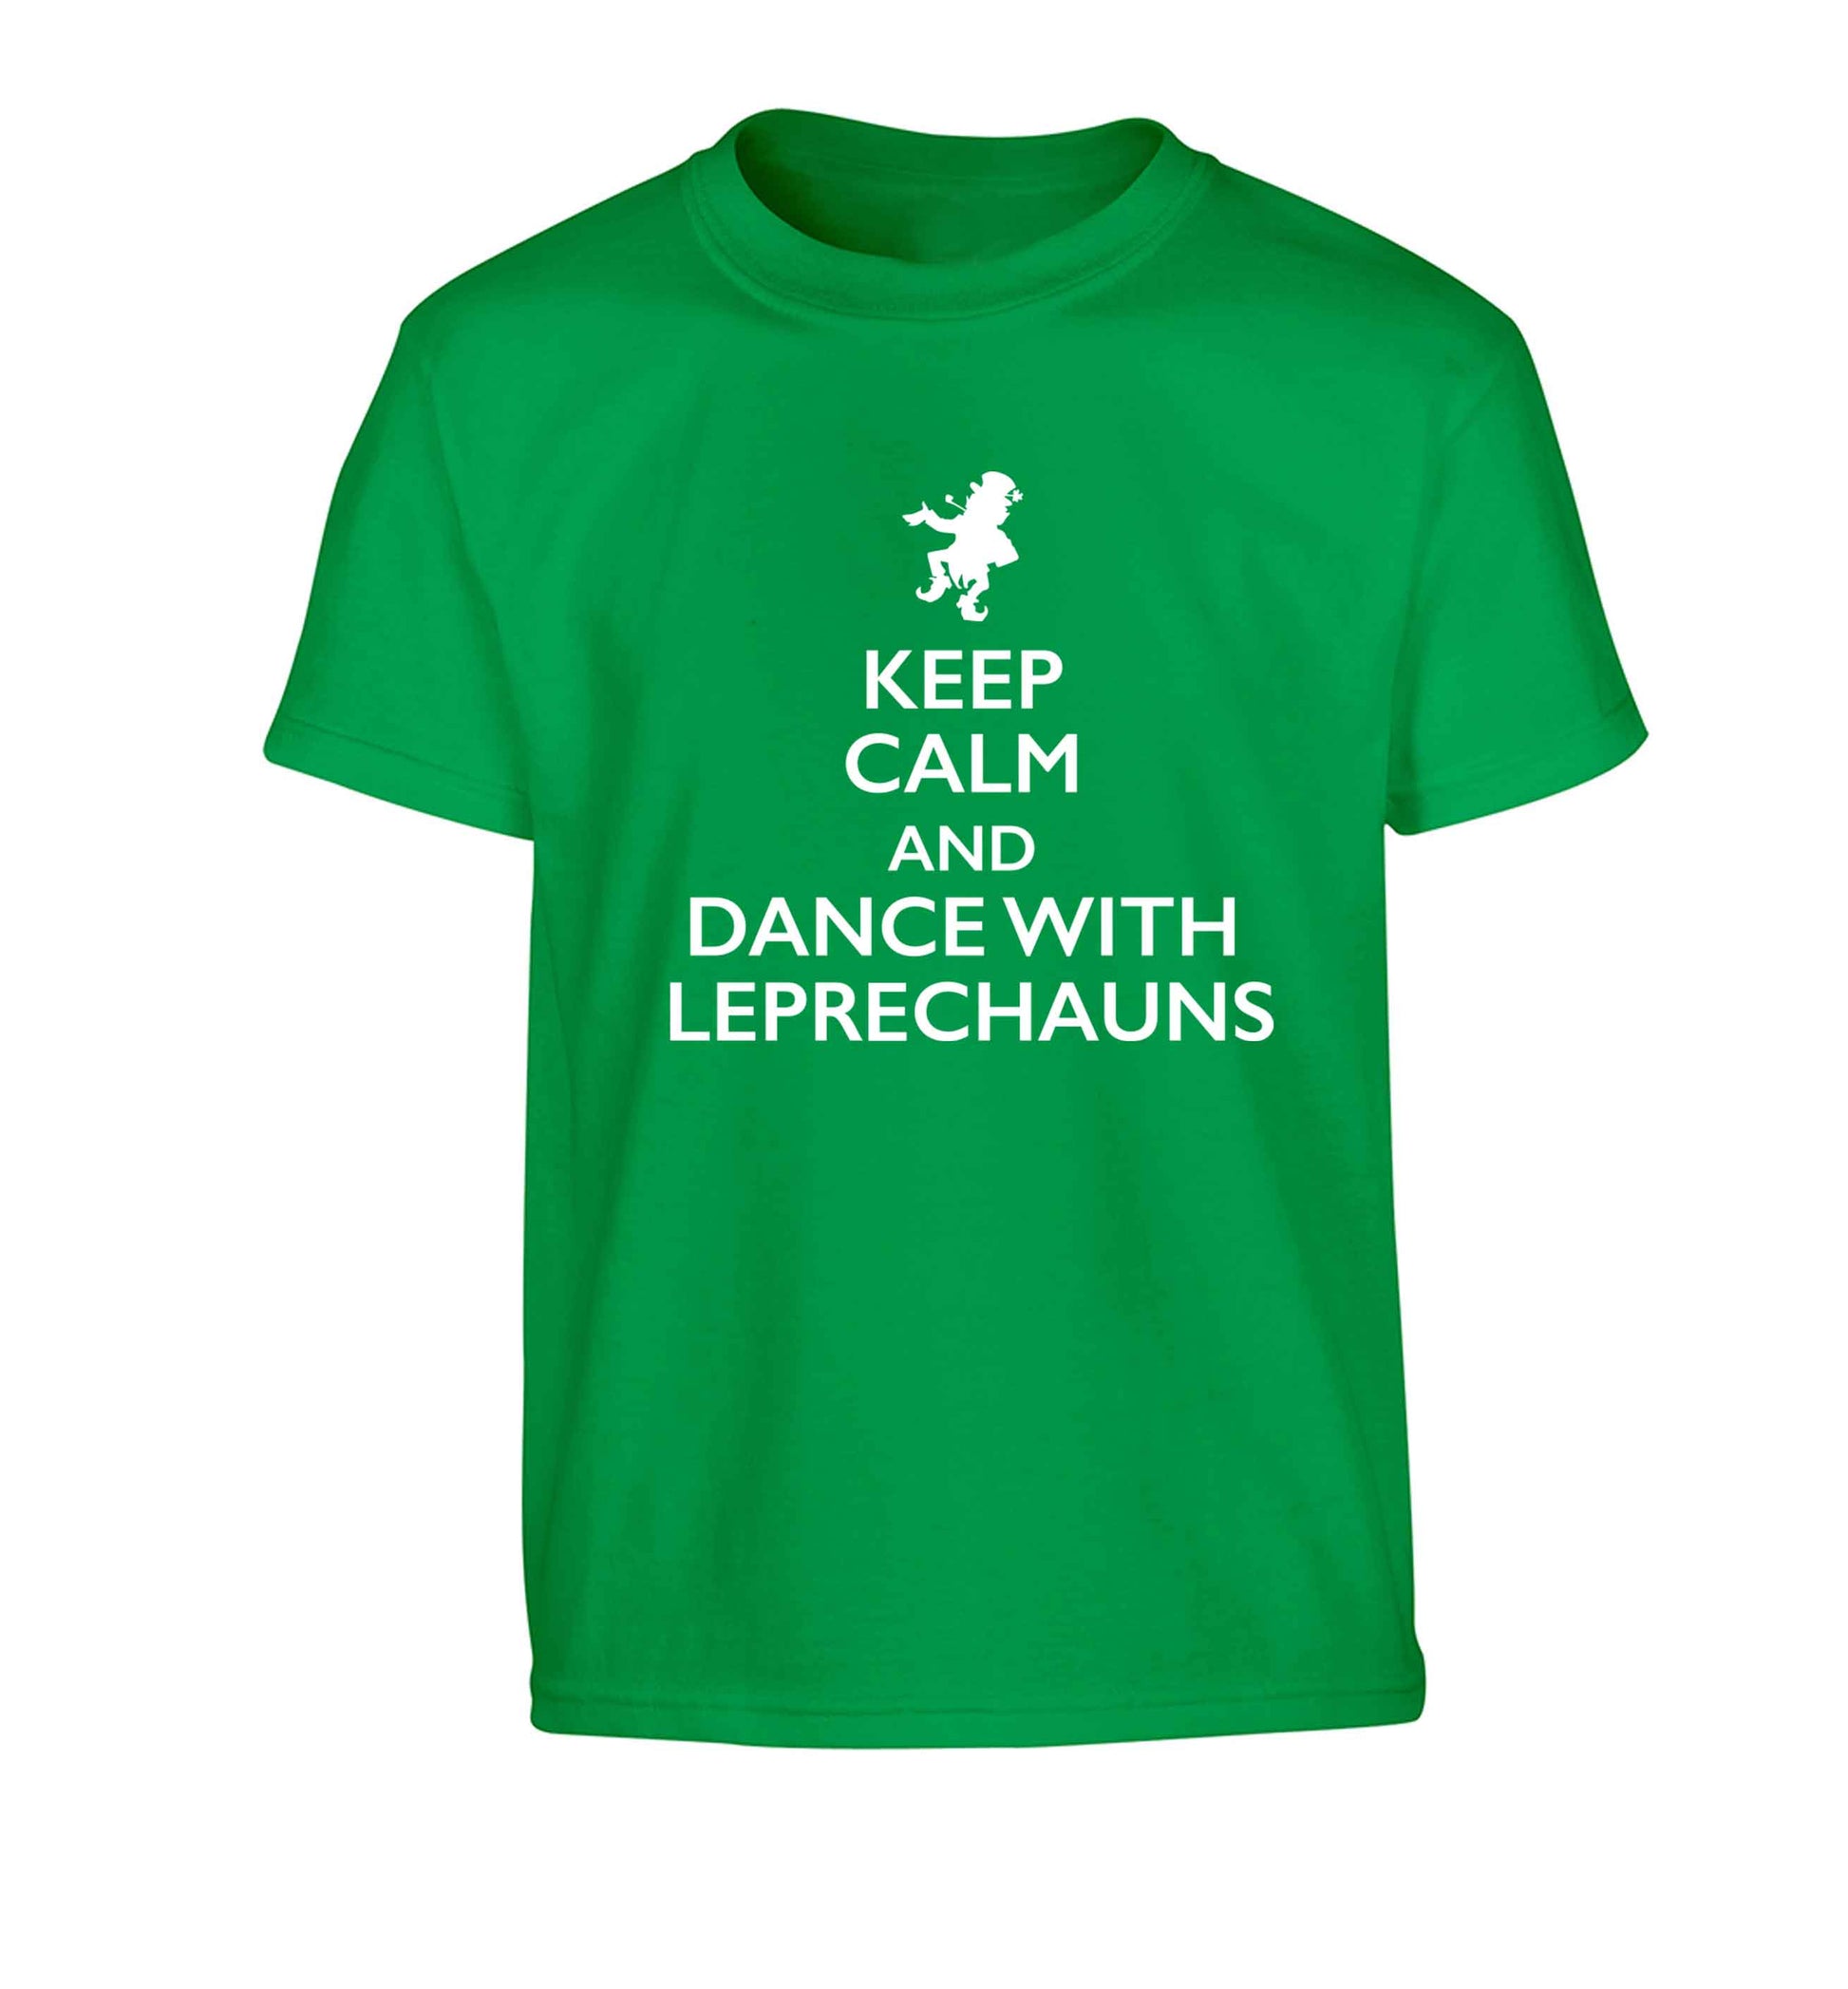 Keep calm and dance with leprechauns Children's green Tshirt 12-13 Years